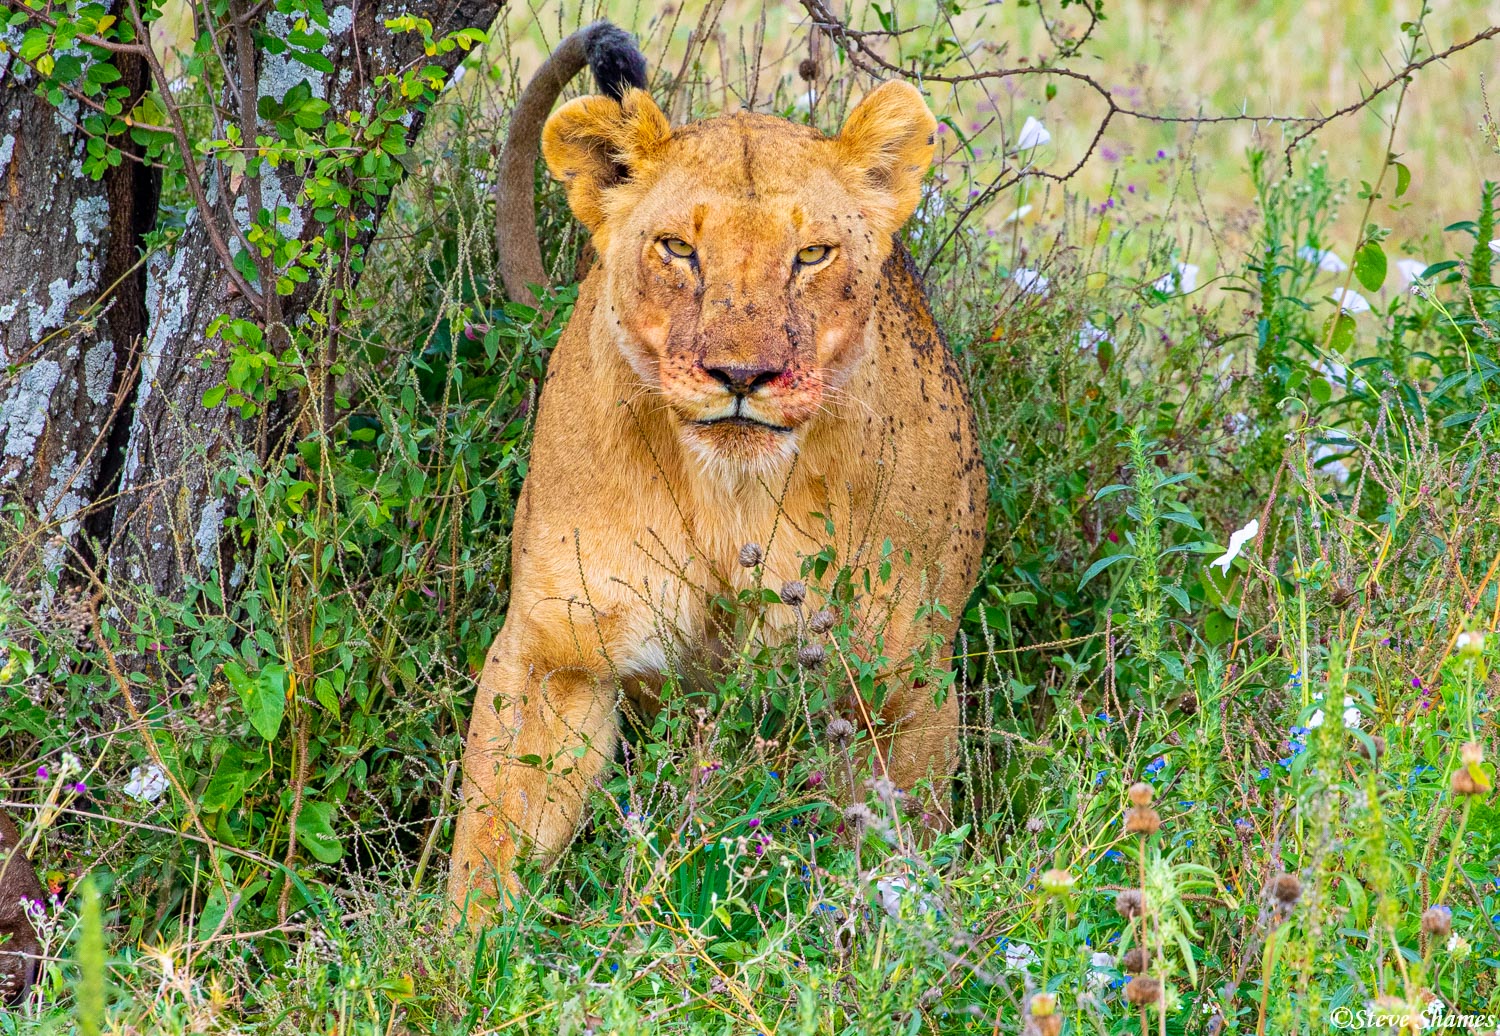 Lioness taking a break from her fly covered wildebeest meal.